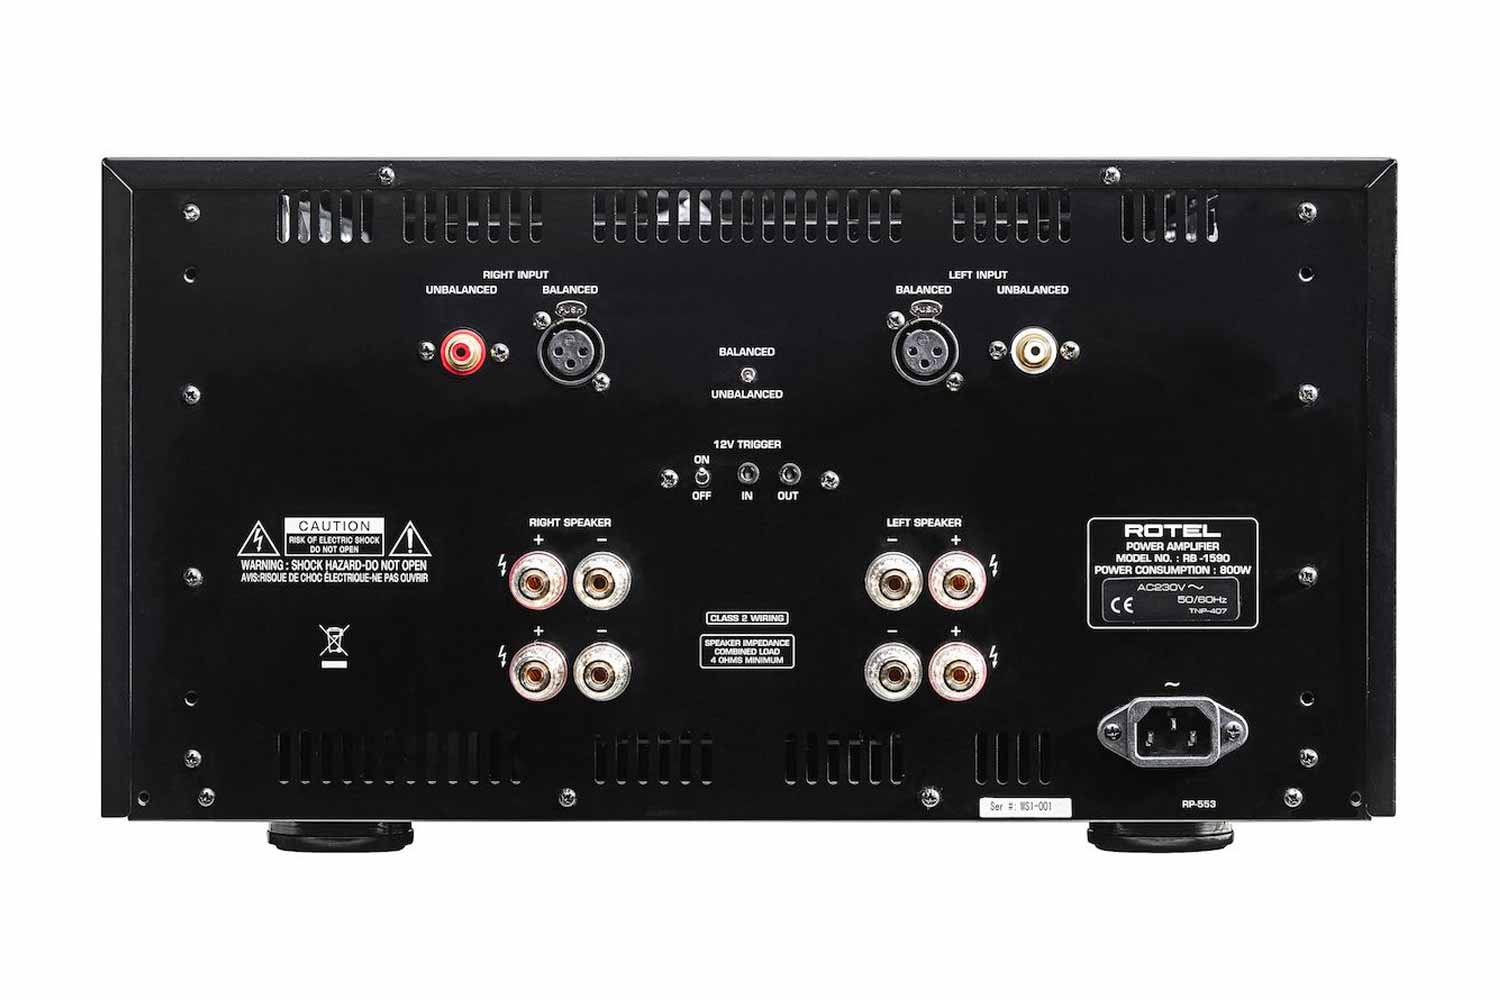 Rotel RB-1590 - Stereo Endstufe